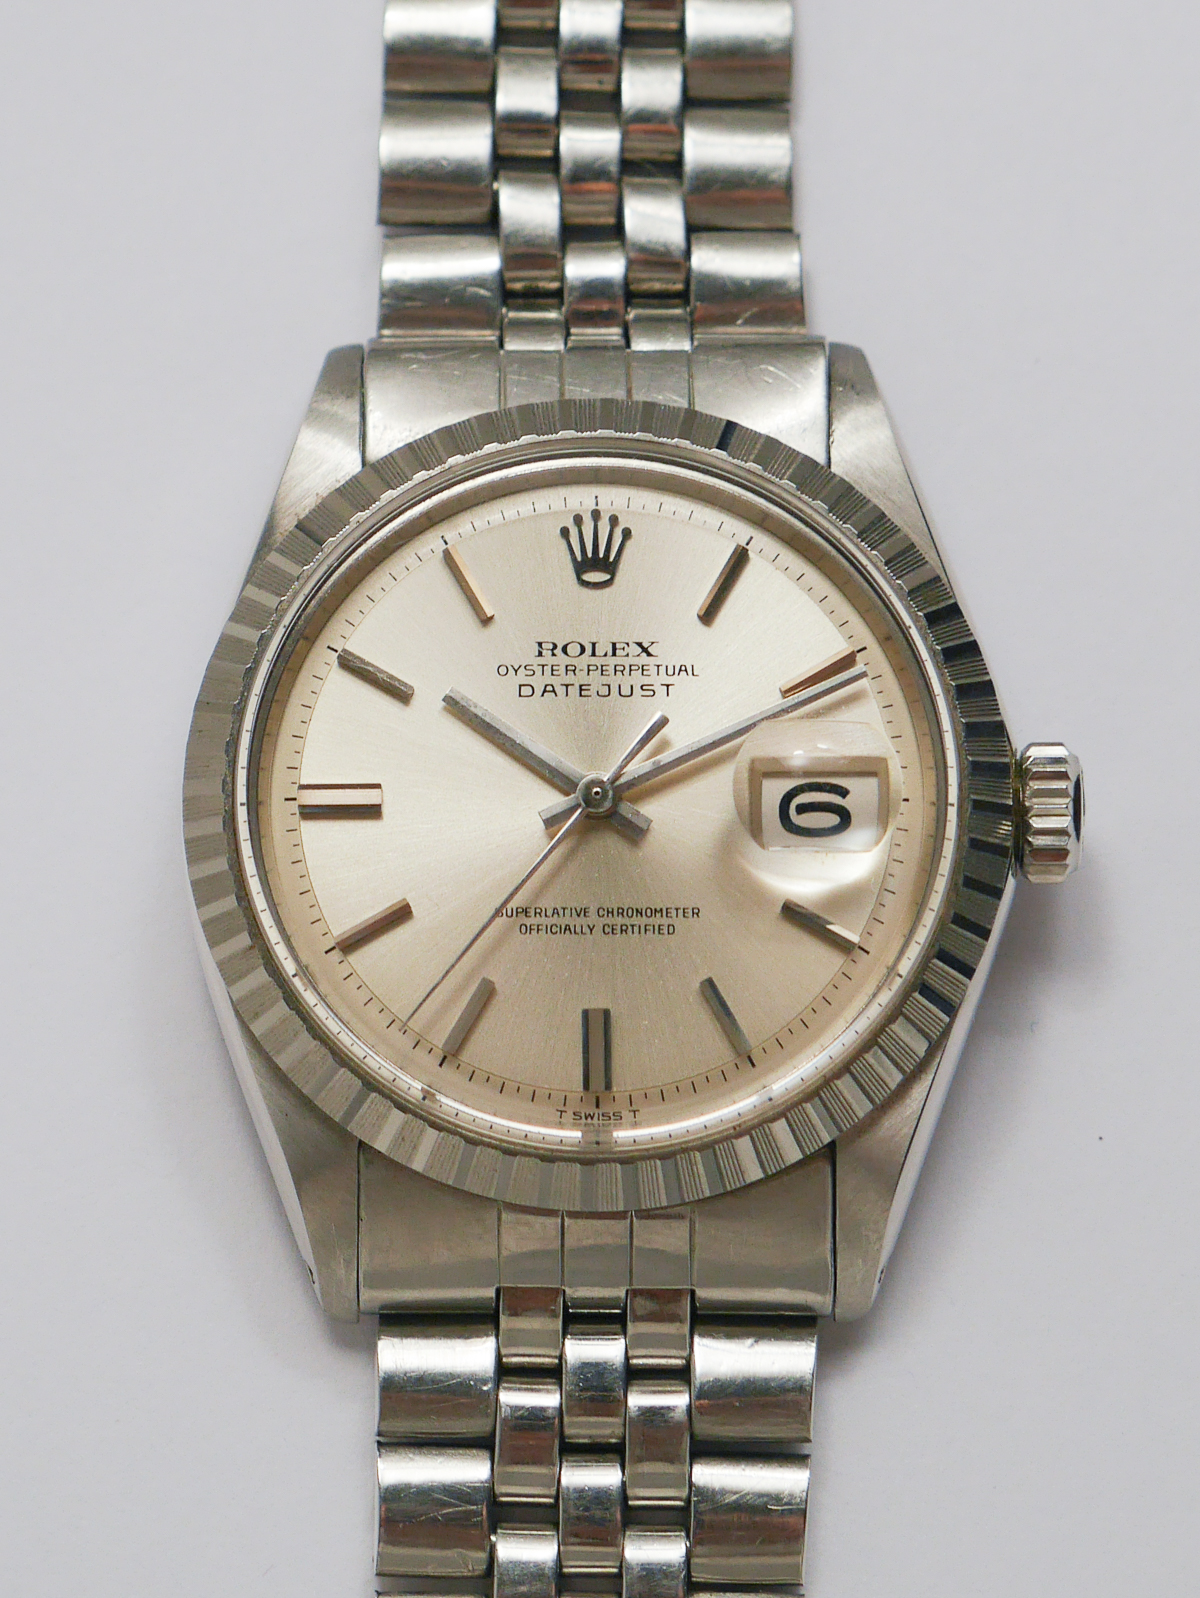 Rolex Oyster Perpetual Datejust 1601-3 